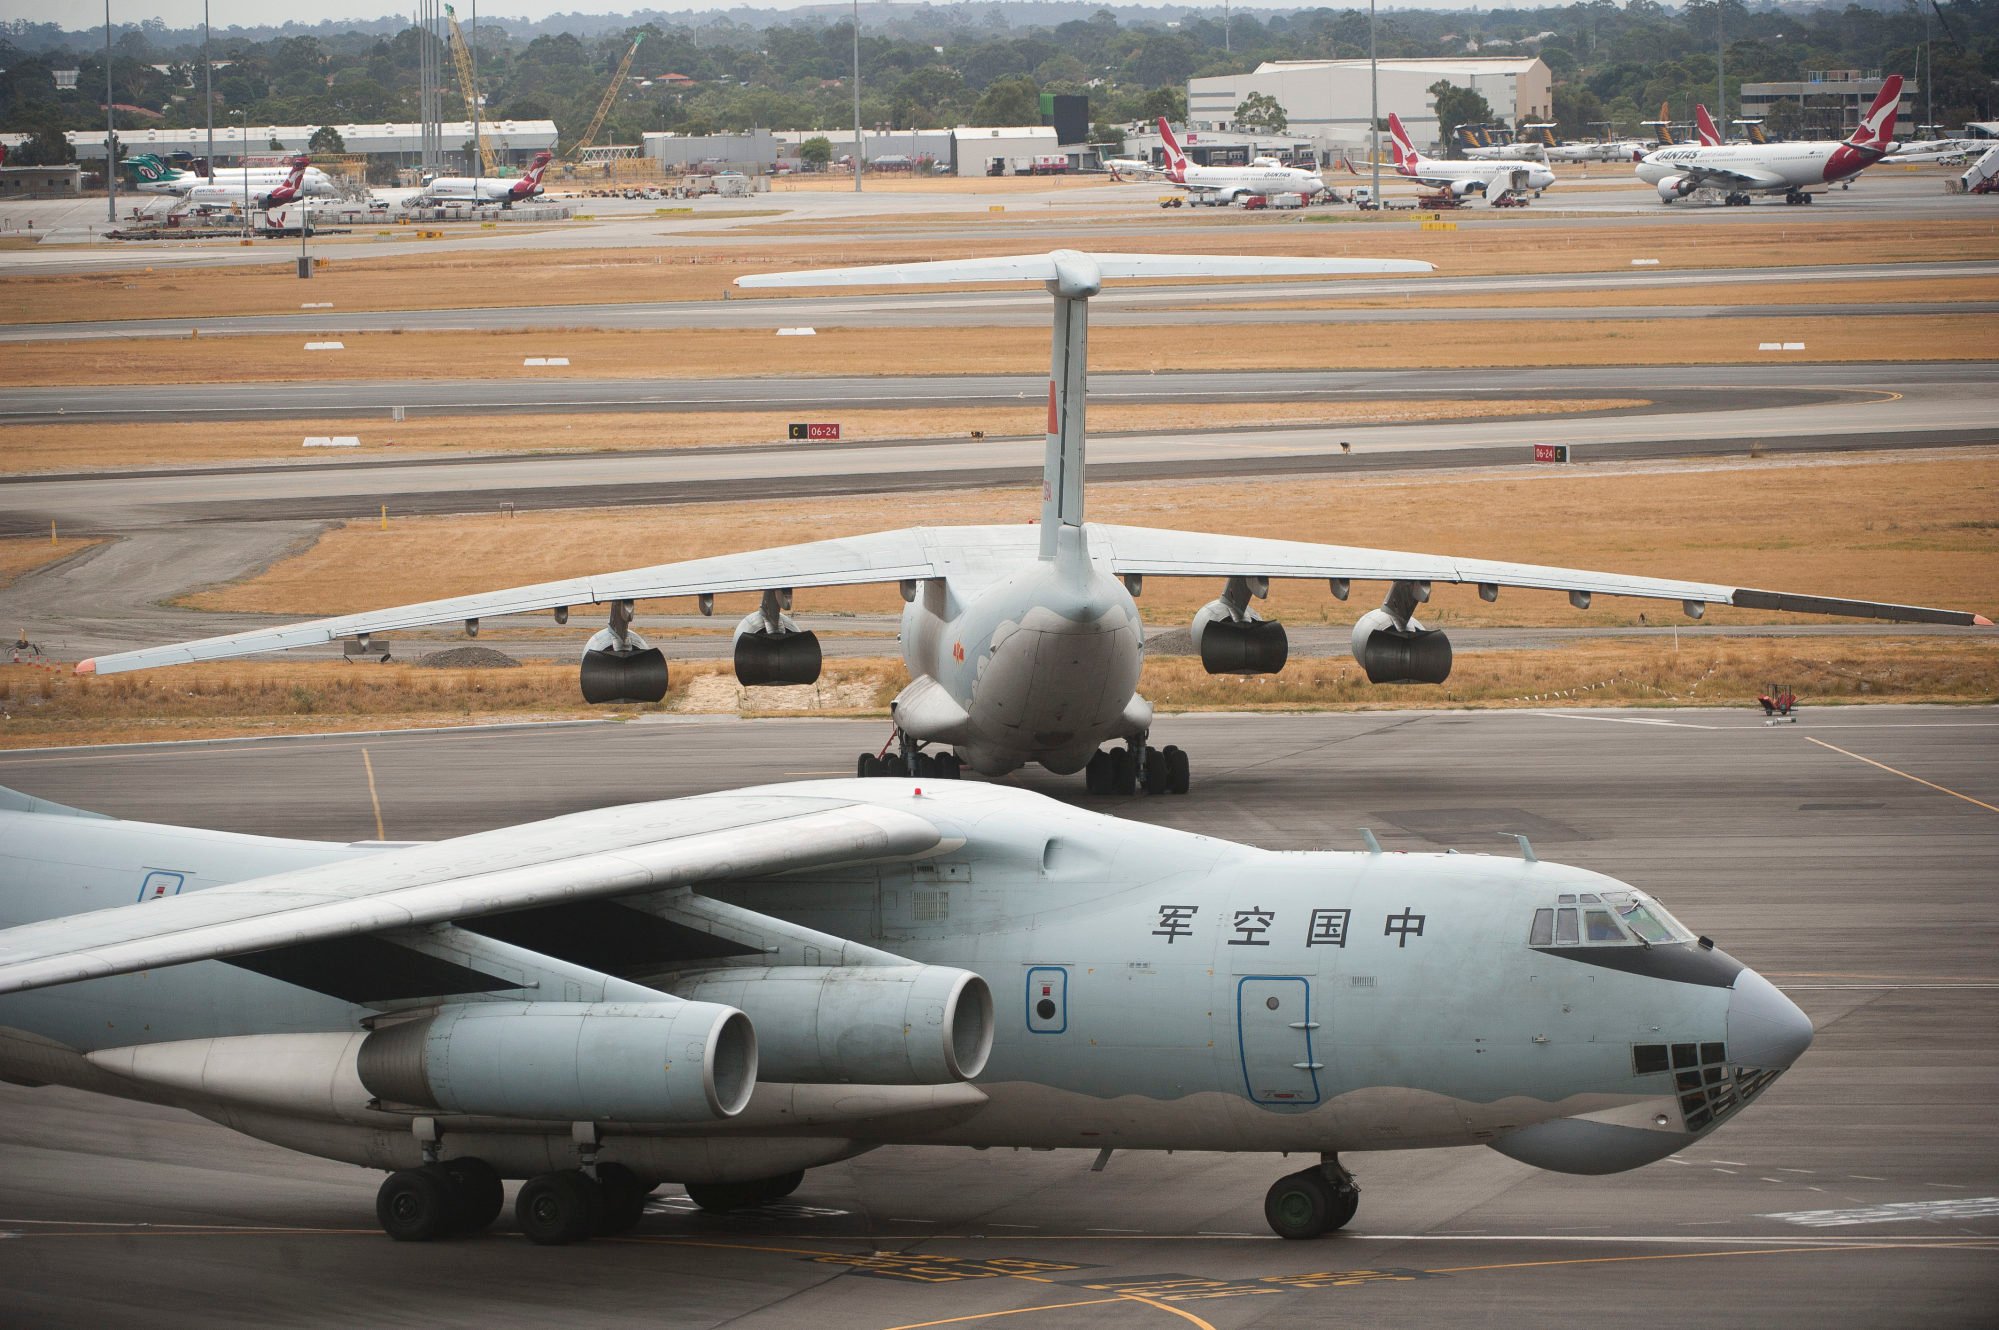 China bought Ilyushin Il-76 transport aircraft from Russia in the late 1990s and early 2000s. Photo: Xinhua